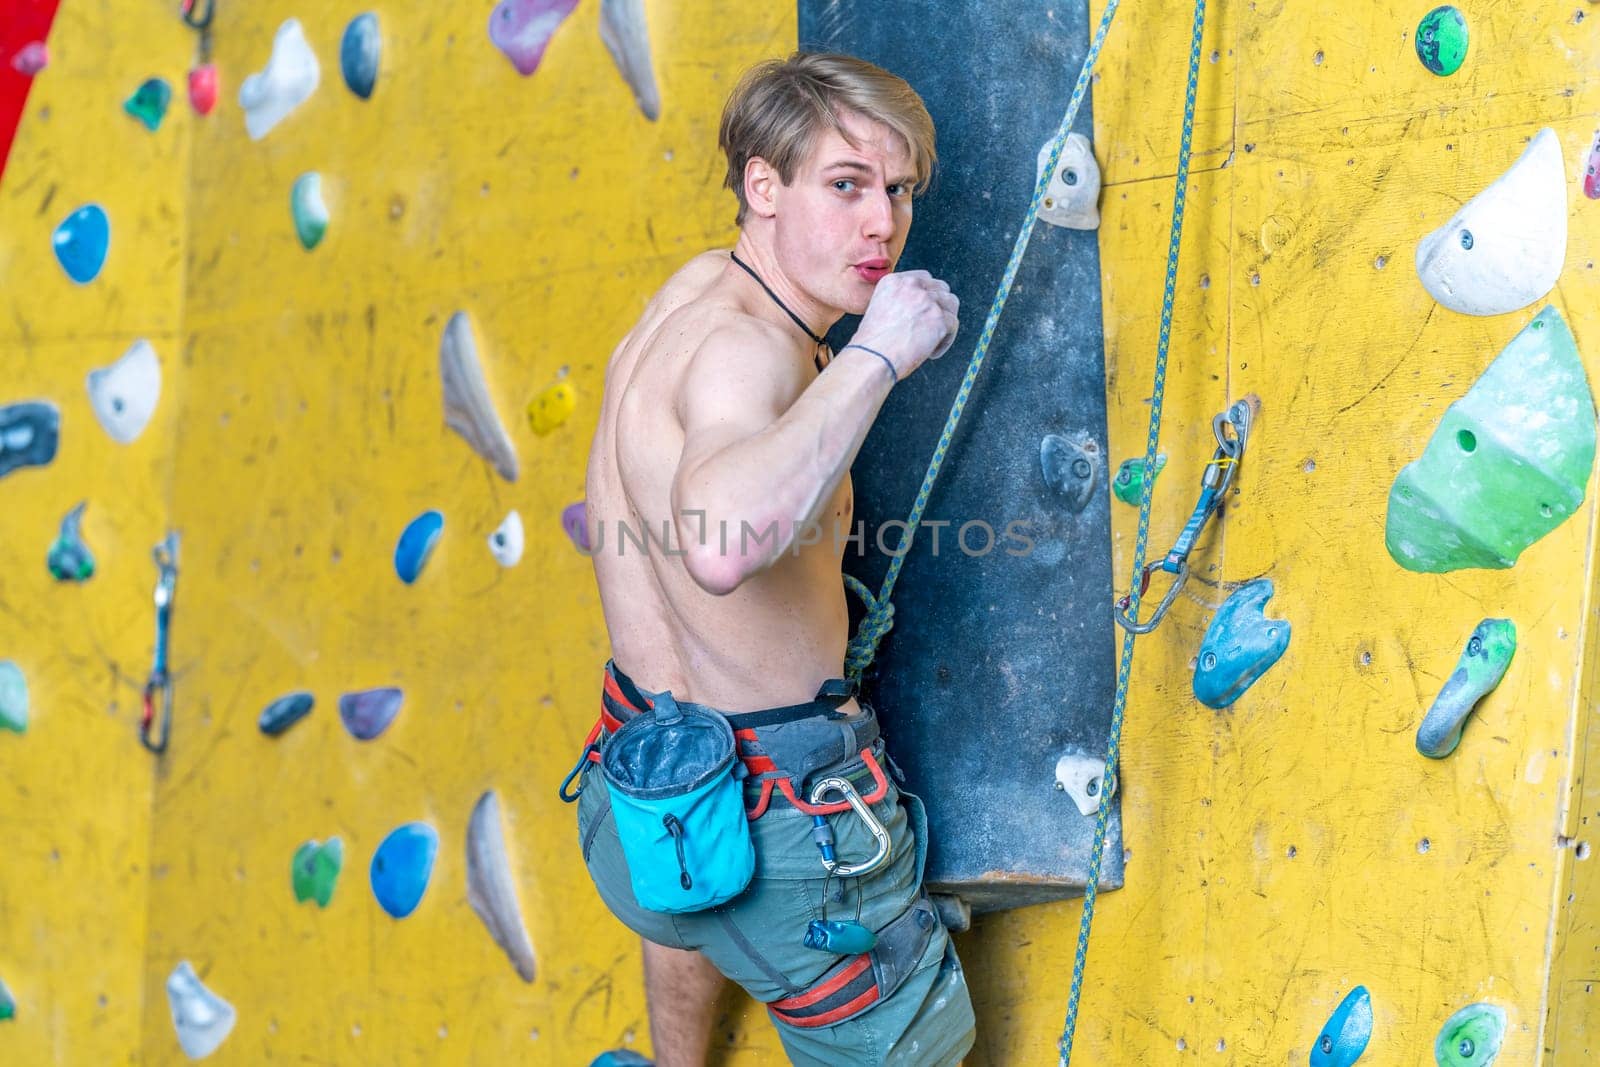 applying magnesium to the hands from the bag before climbing the climbing wall. High quality photo